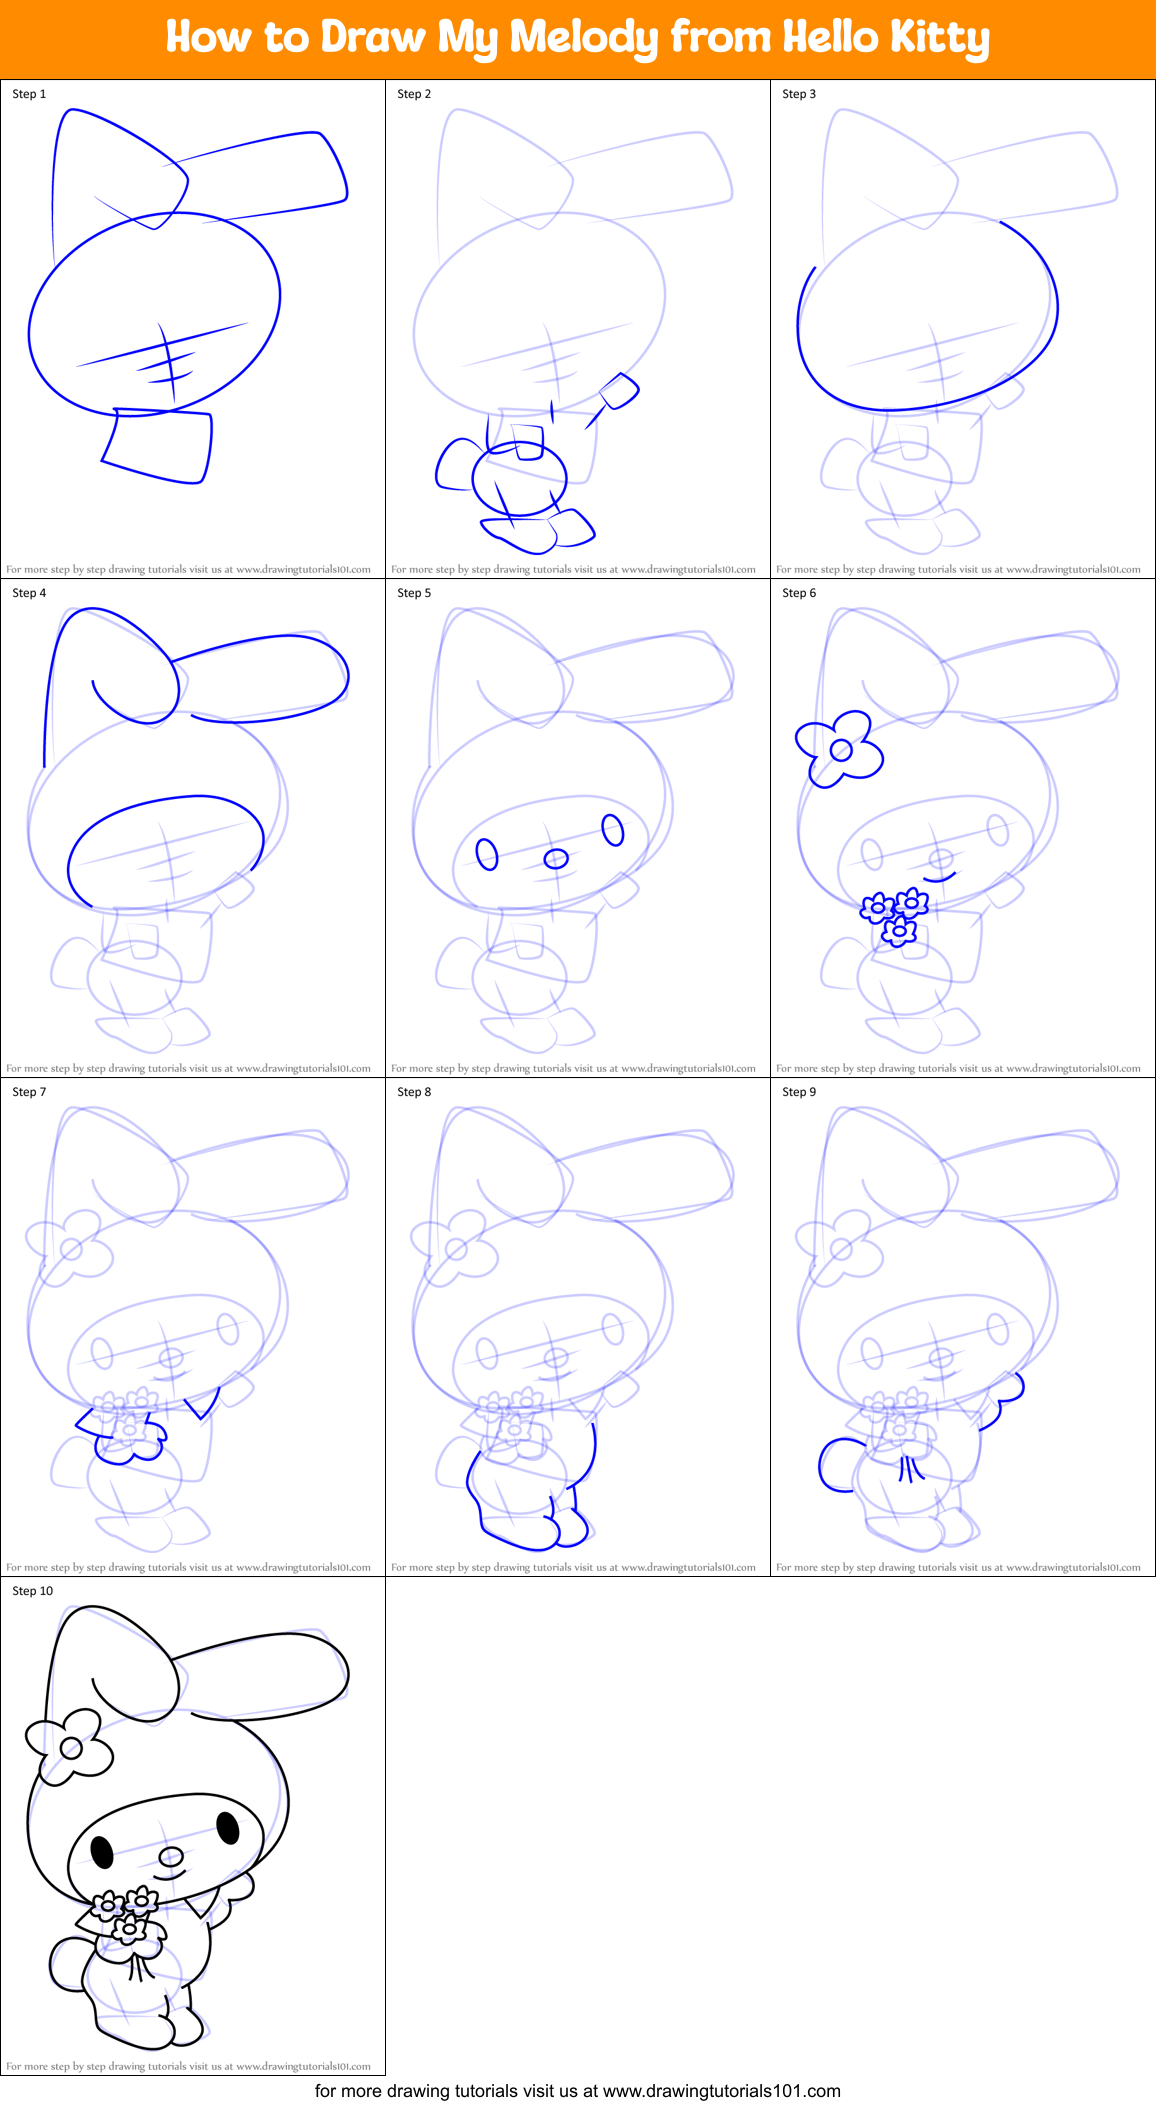 How to Draw My Melody from Hello Kitty printable step by step drawing